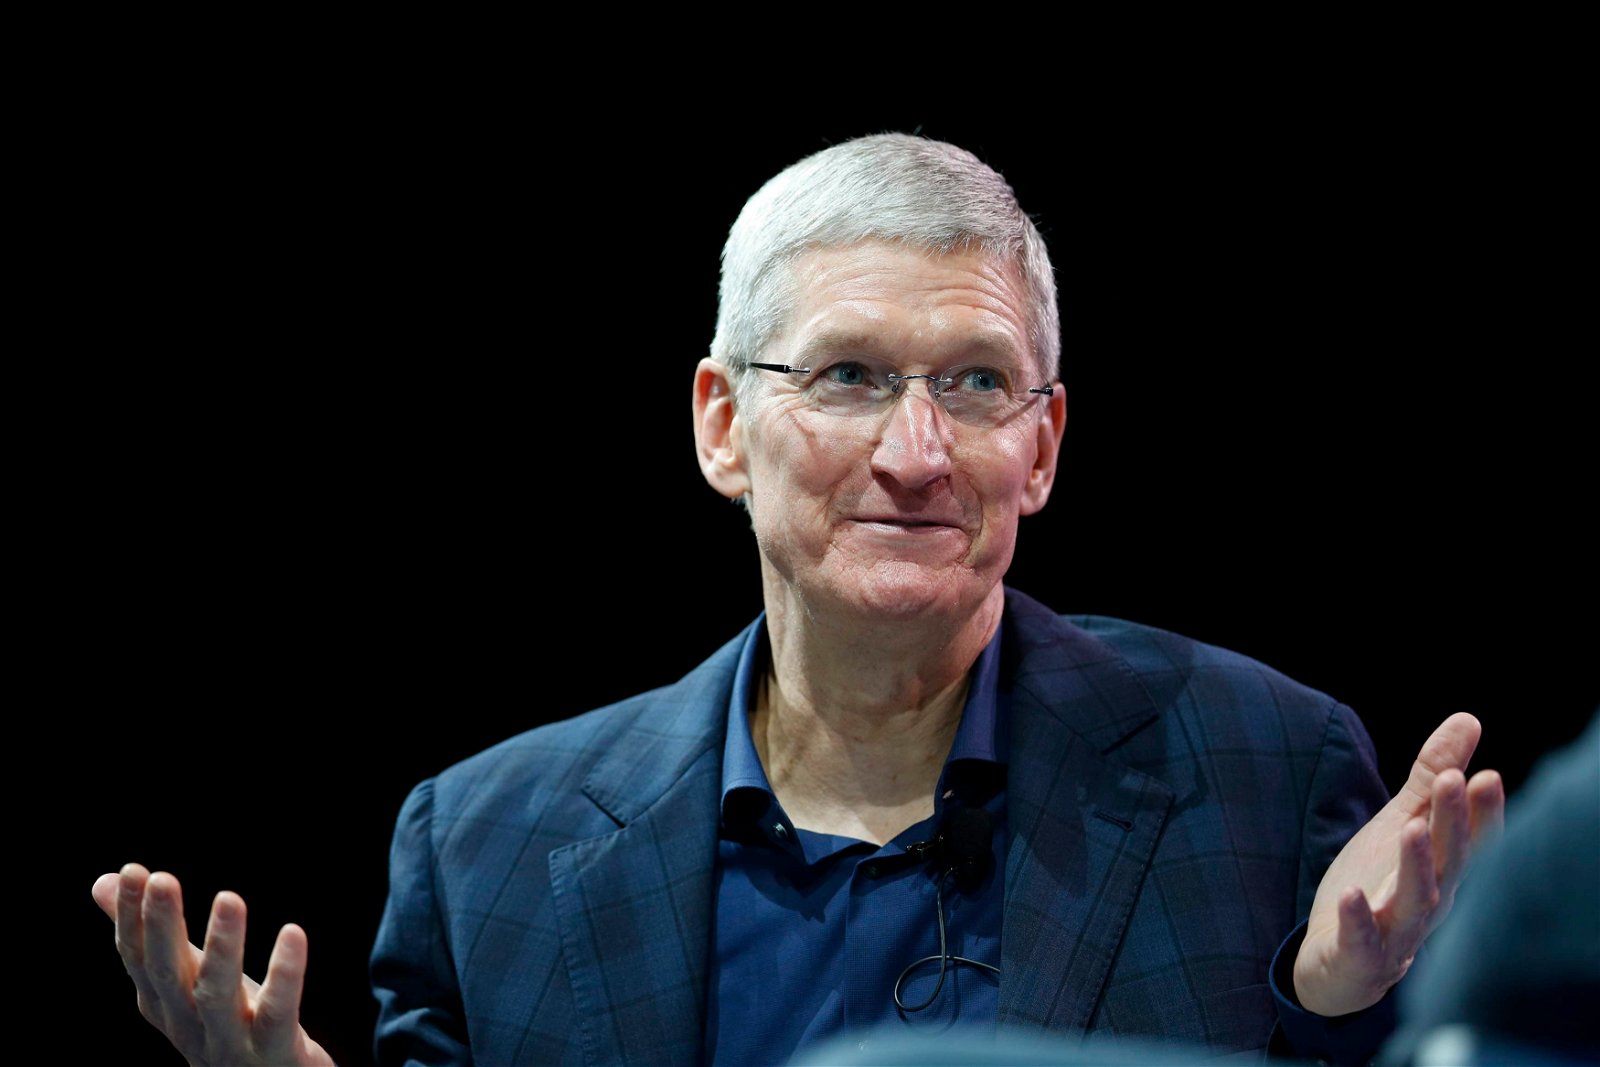 Apple CEO Tim Cook speaks at the WSJD Live conference in Laguna Beach